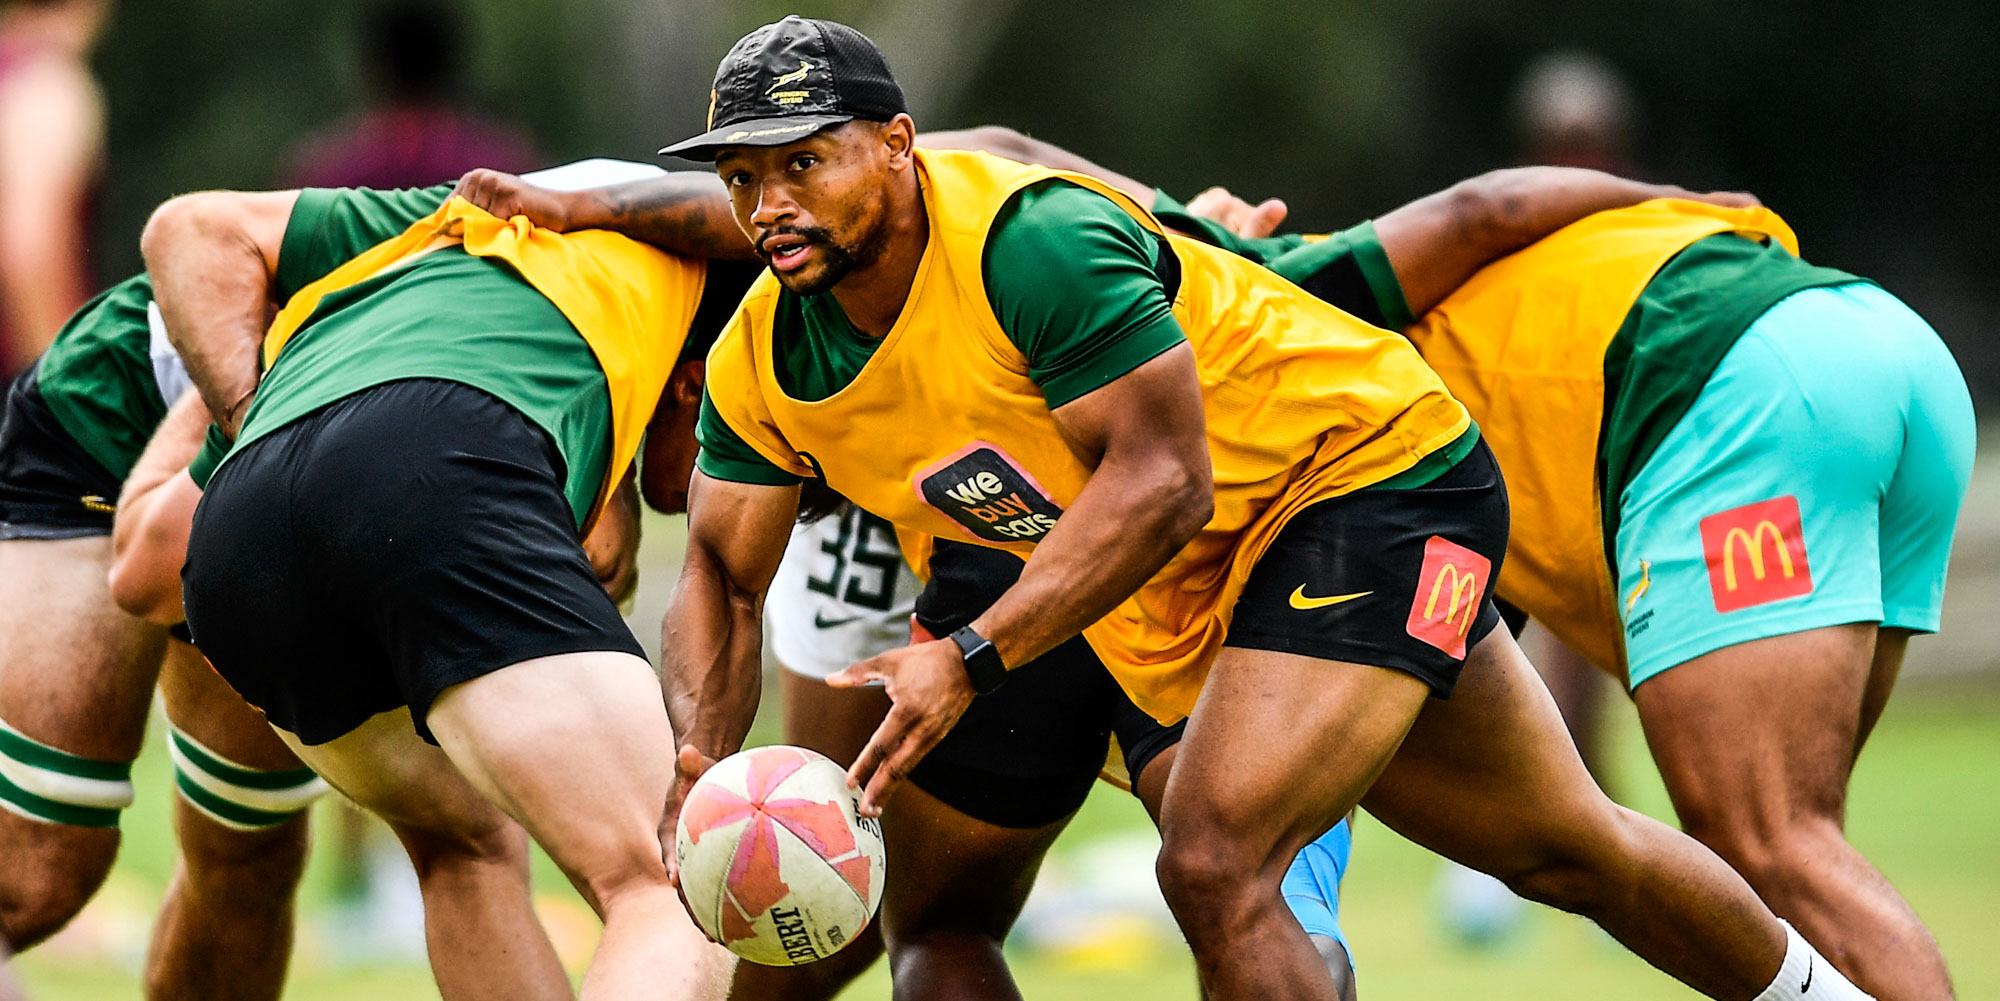 Shaun Williams is back with the Blitzboks after four months on the sidelines.